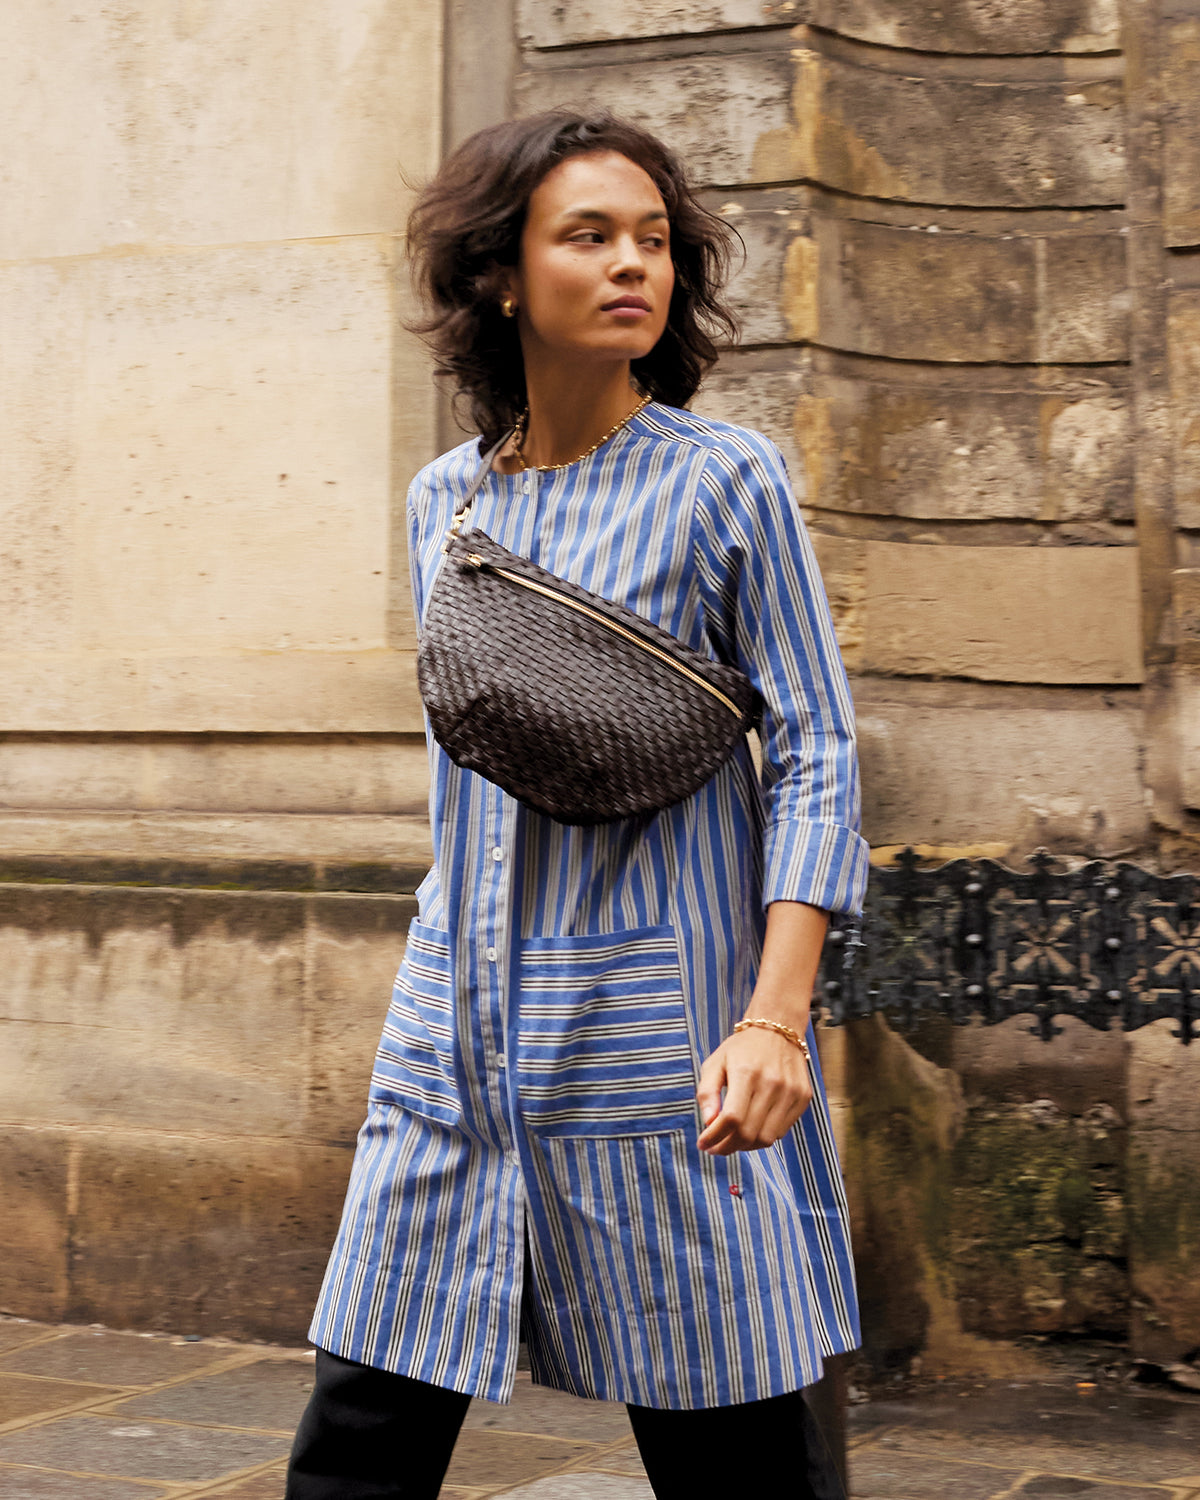 Model wearing the Mariette Dress in Maroq Stripe and carrying the Kalamata Woven Checker Grande Fanny across her chest.